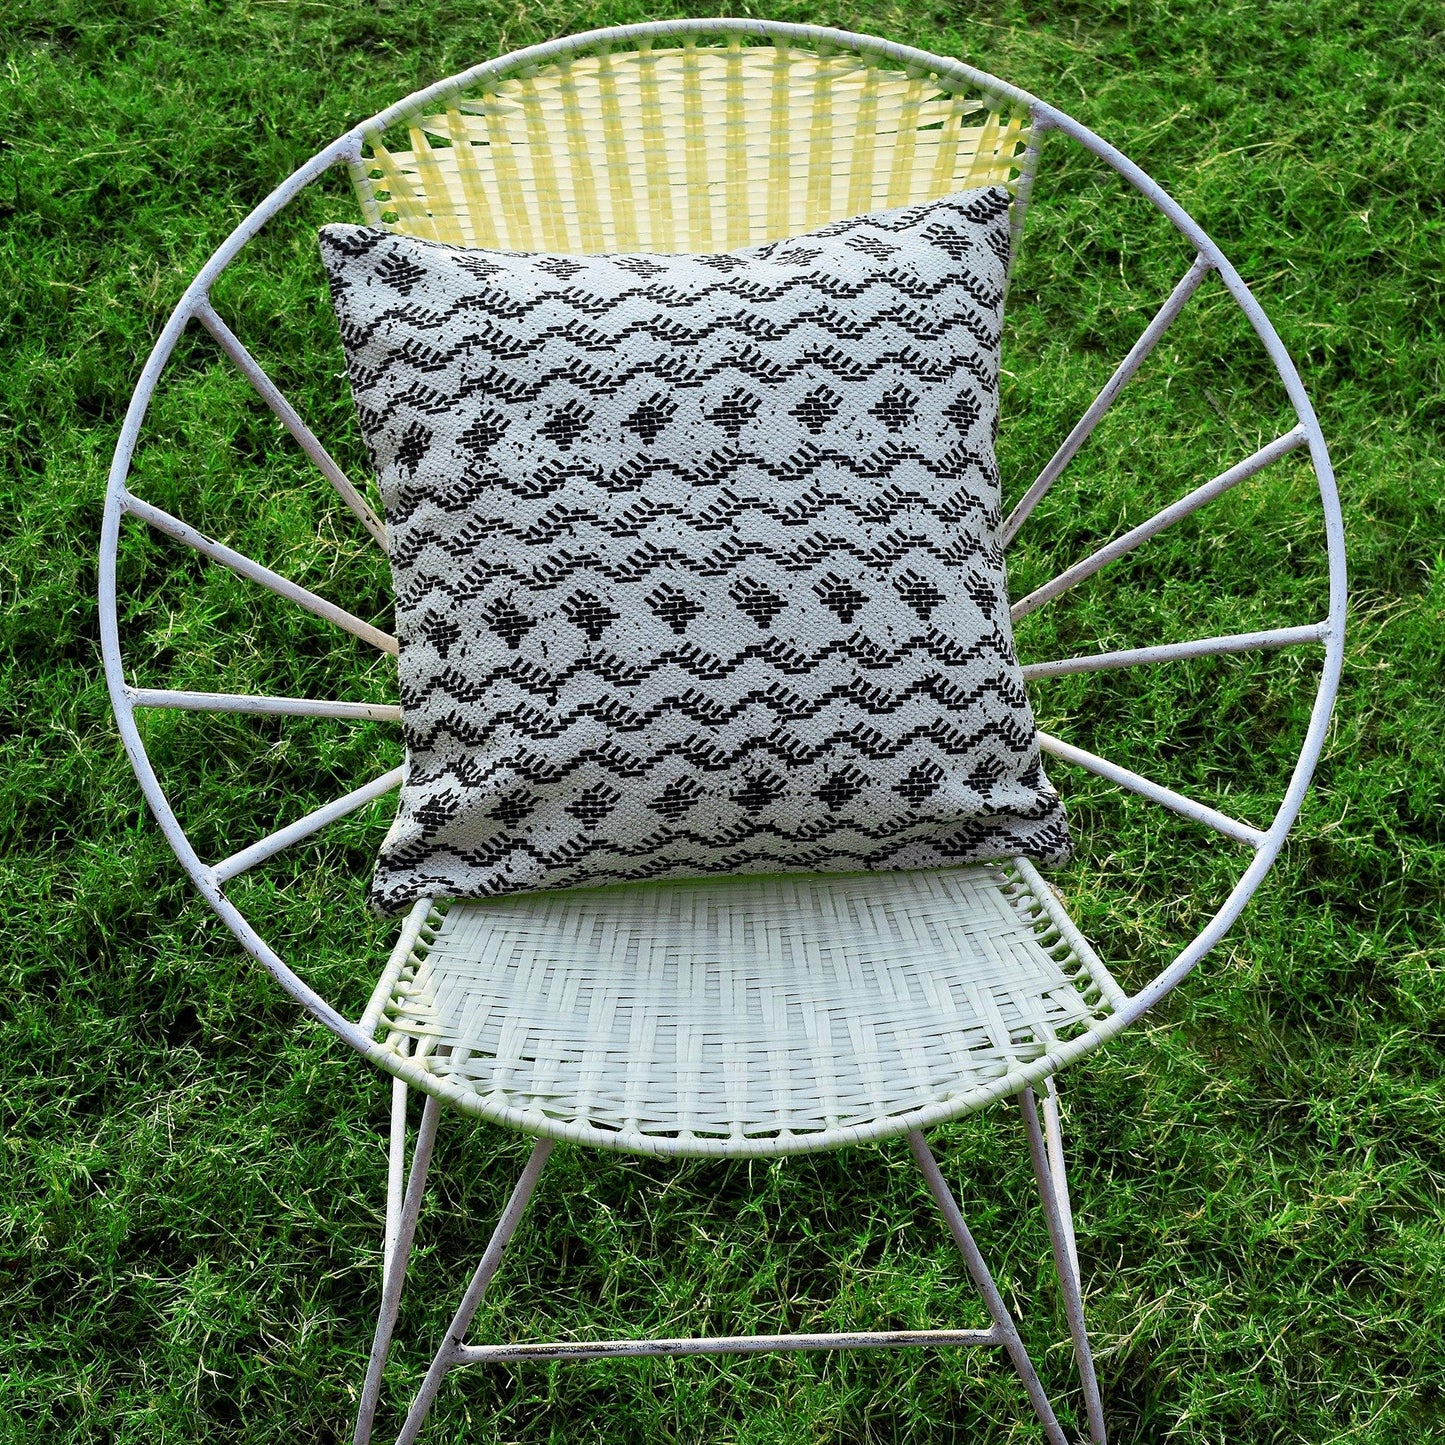 16" Designer Cushion Cover - black and white - The Teal Thread